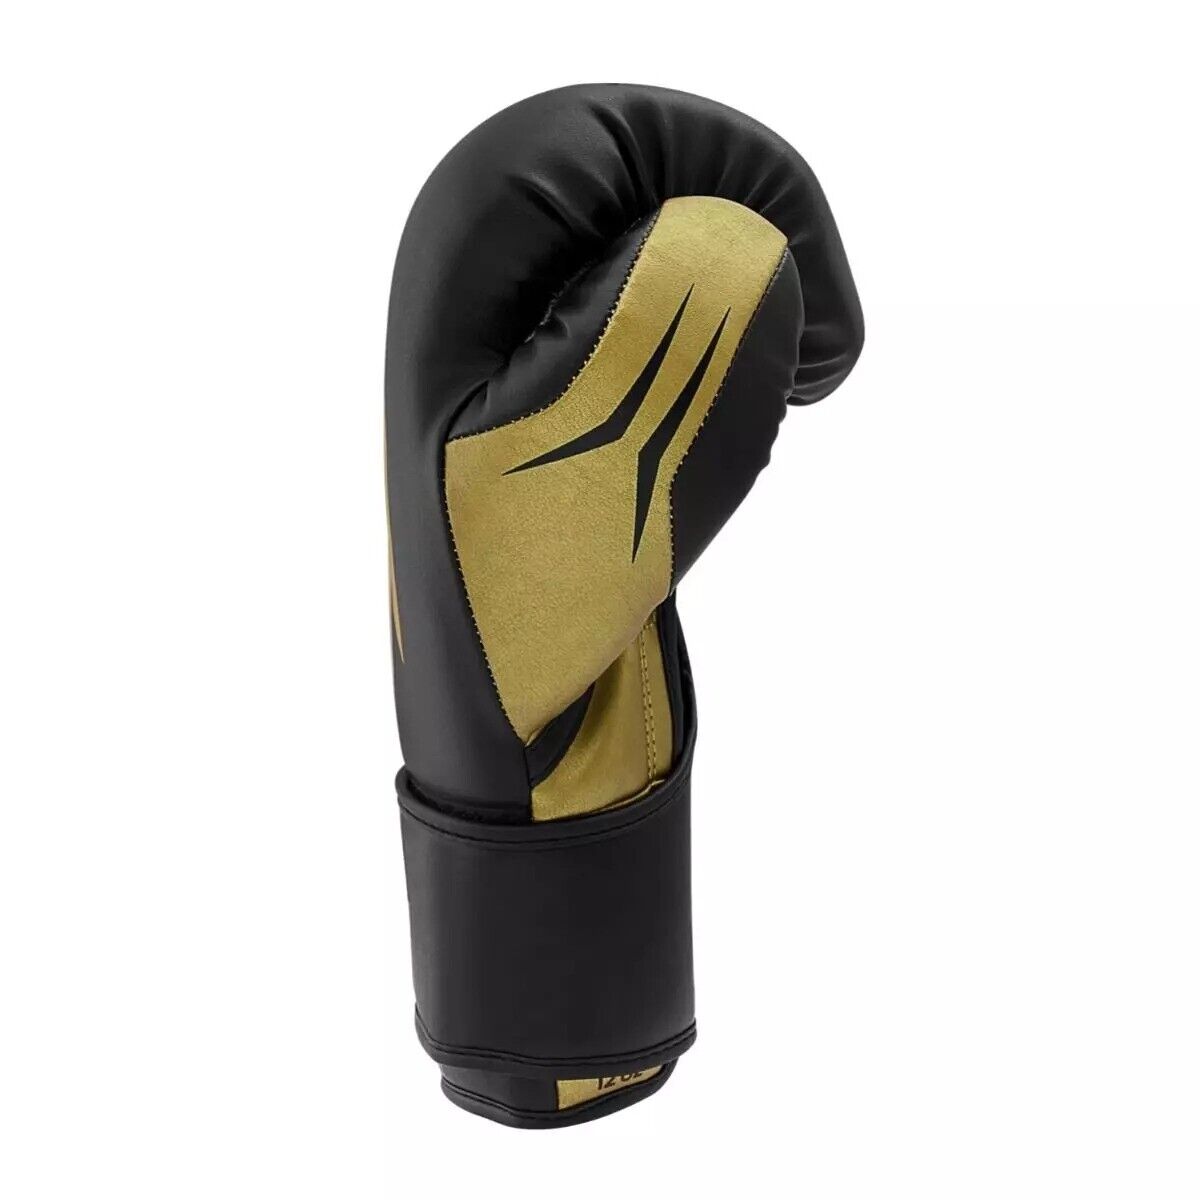 adidas Tilt 350 Pro Boxing Gloves Mexican Cactus Leather